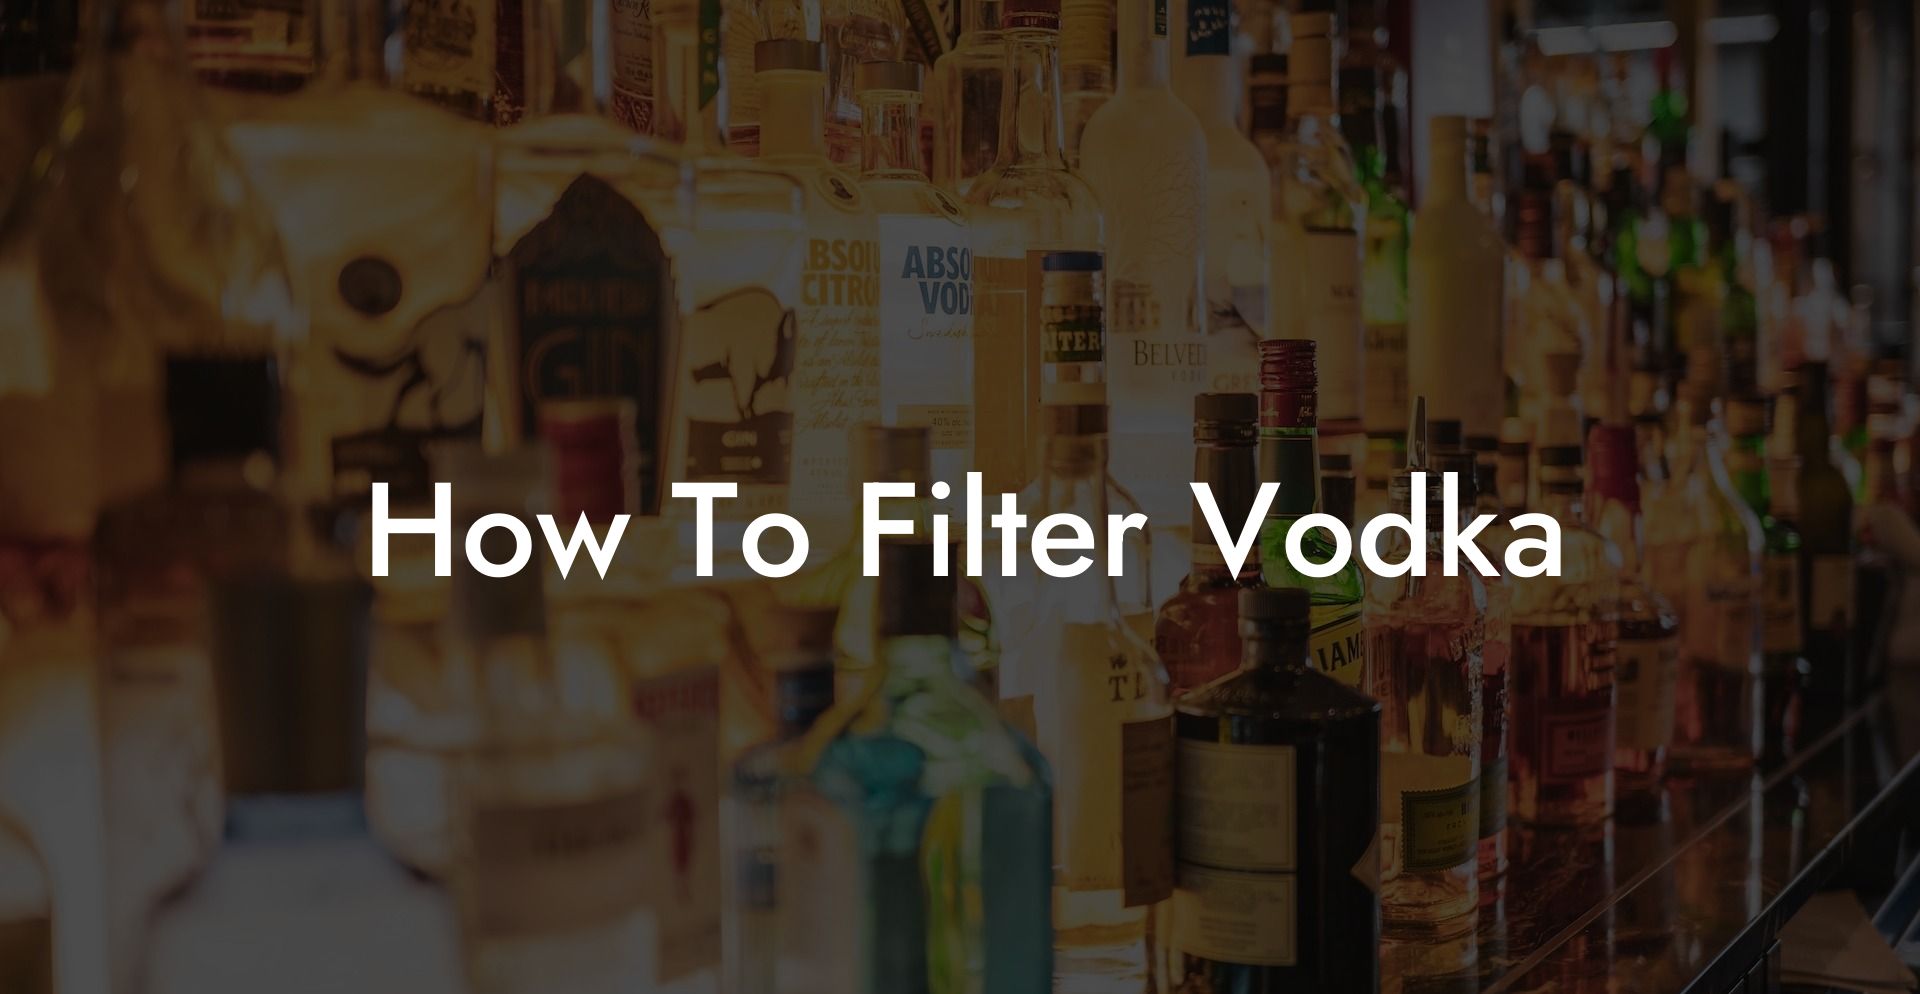 How To Filter Vodka